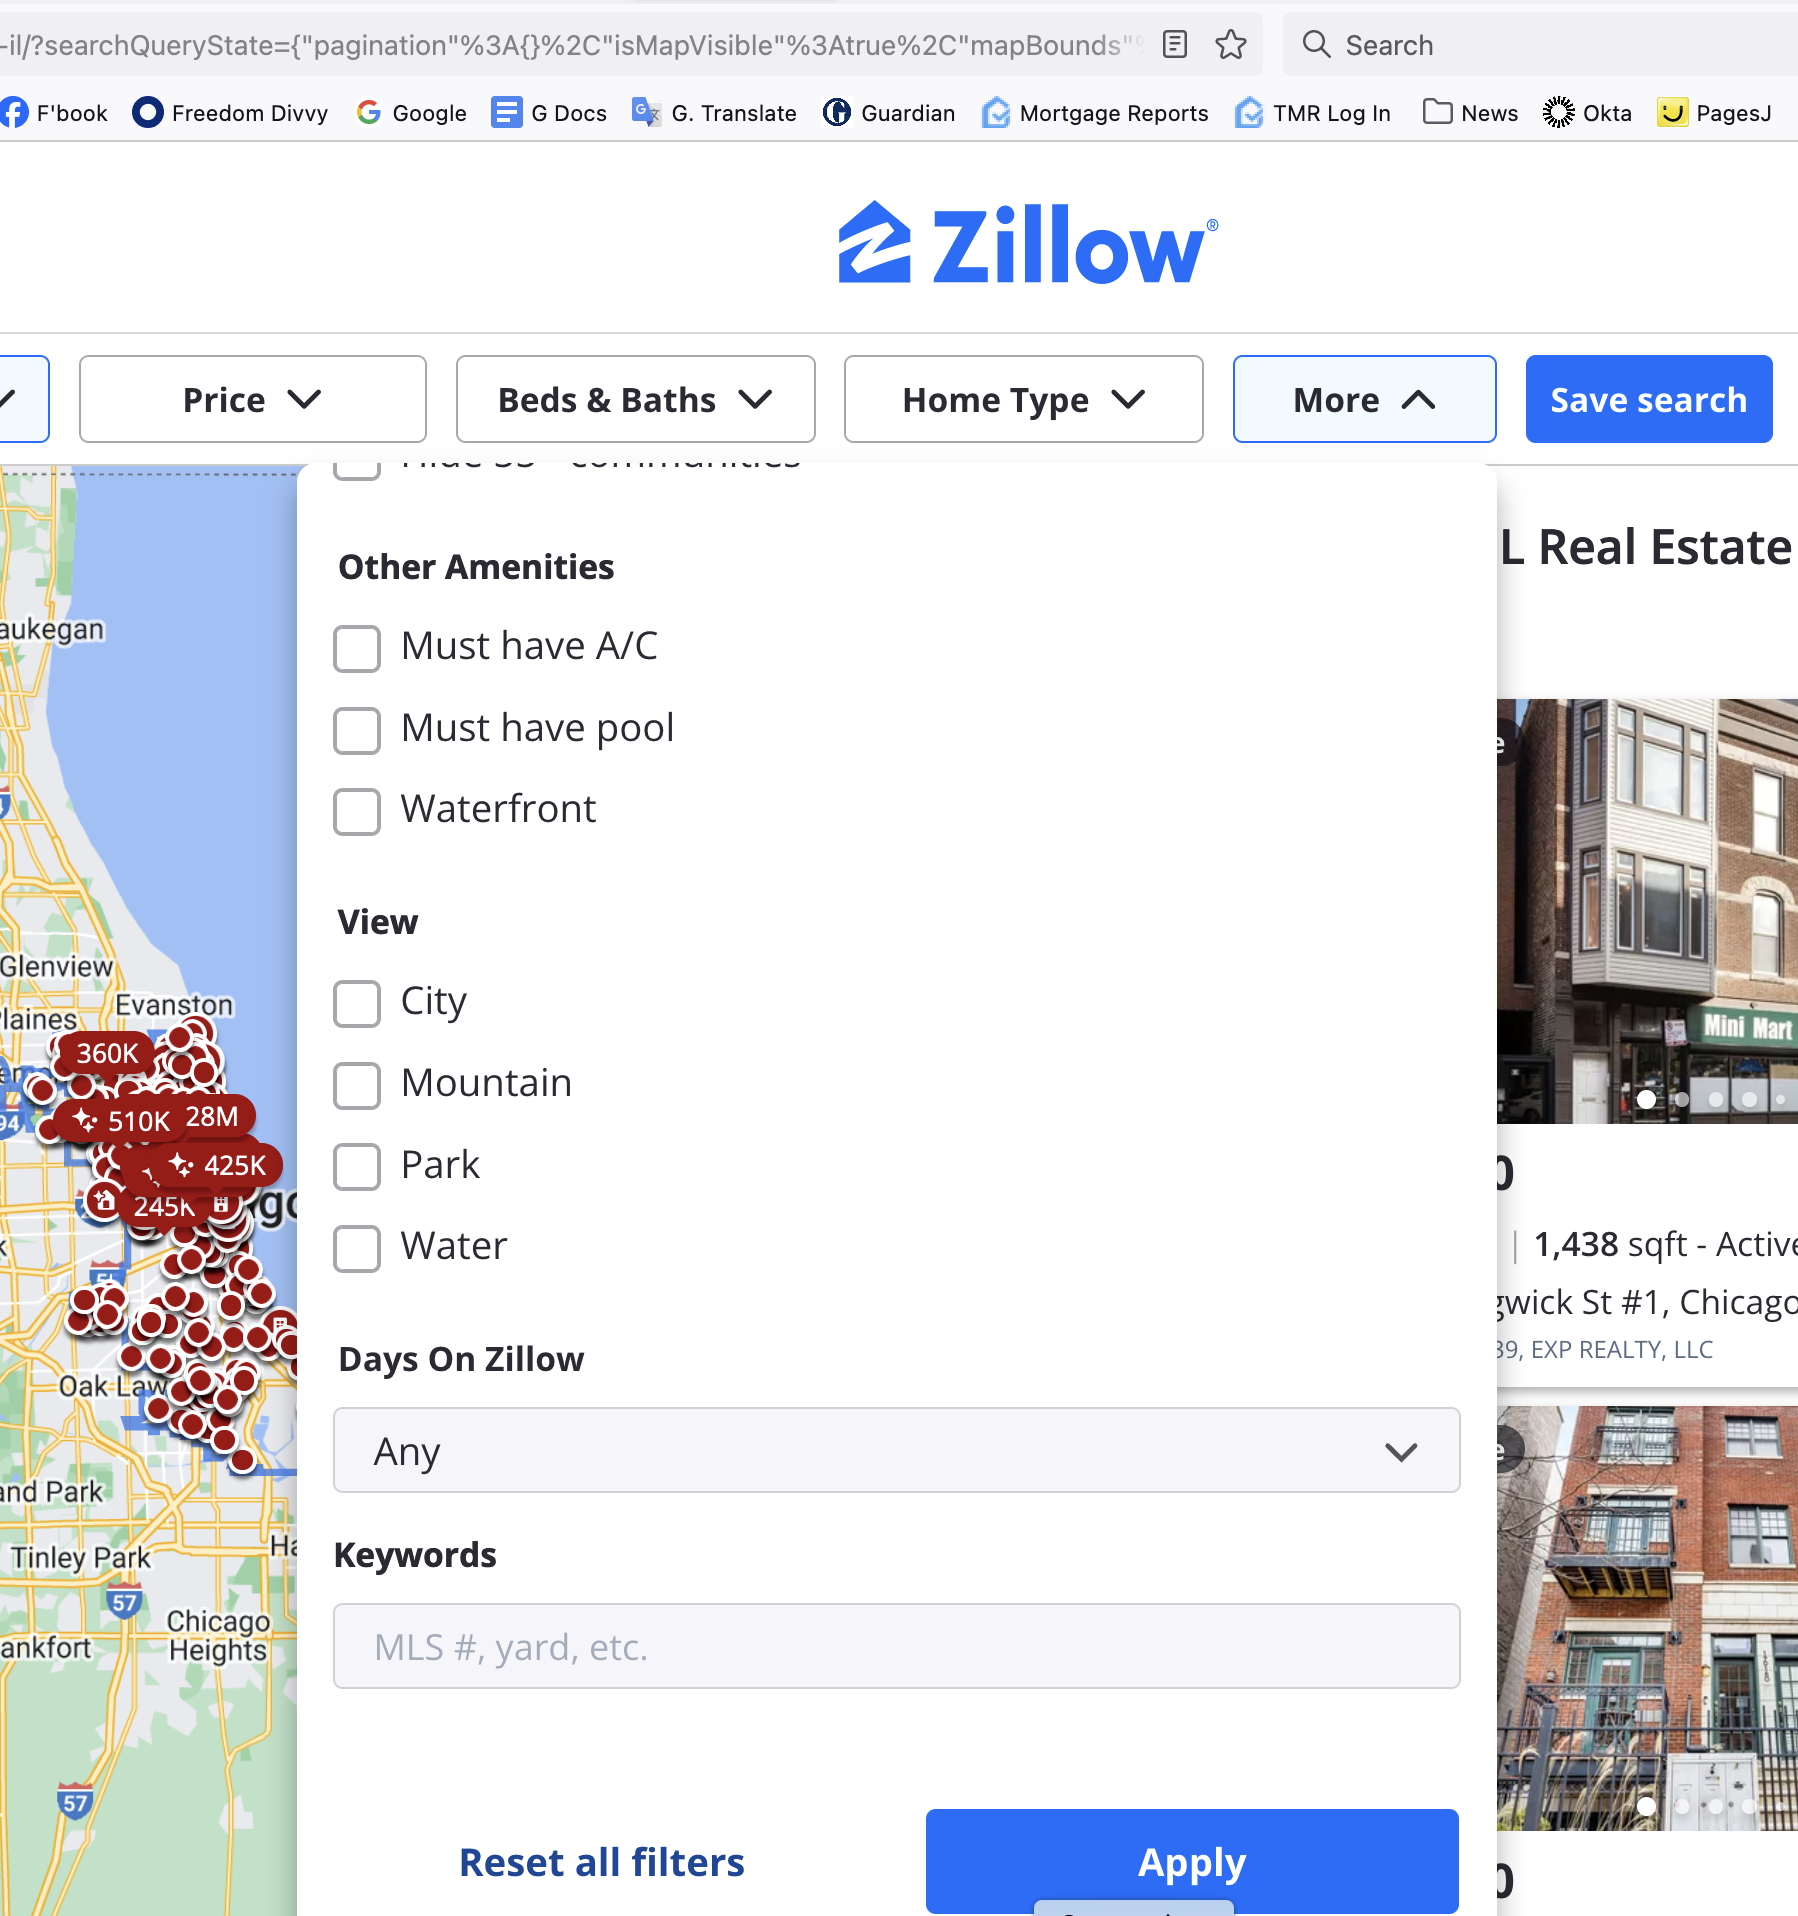 Finding an assumable mortgage on Zillow.com